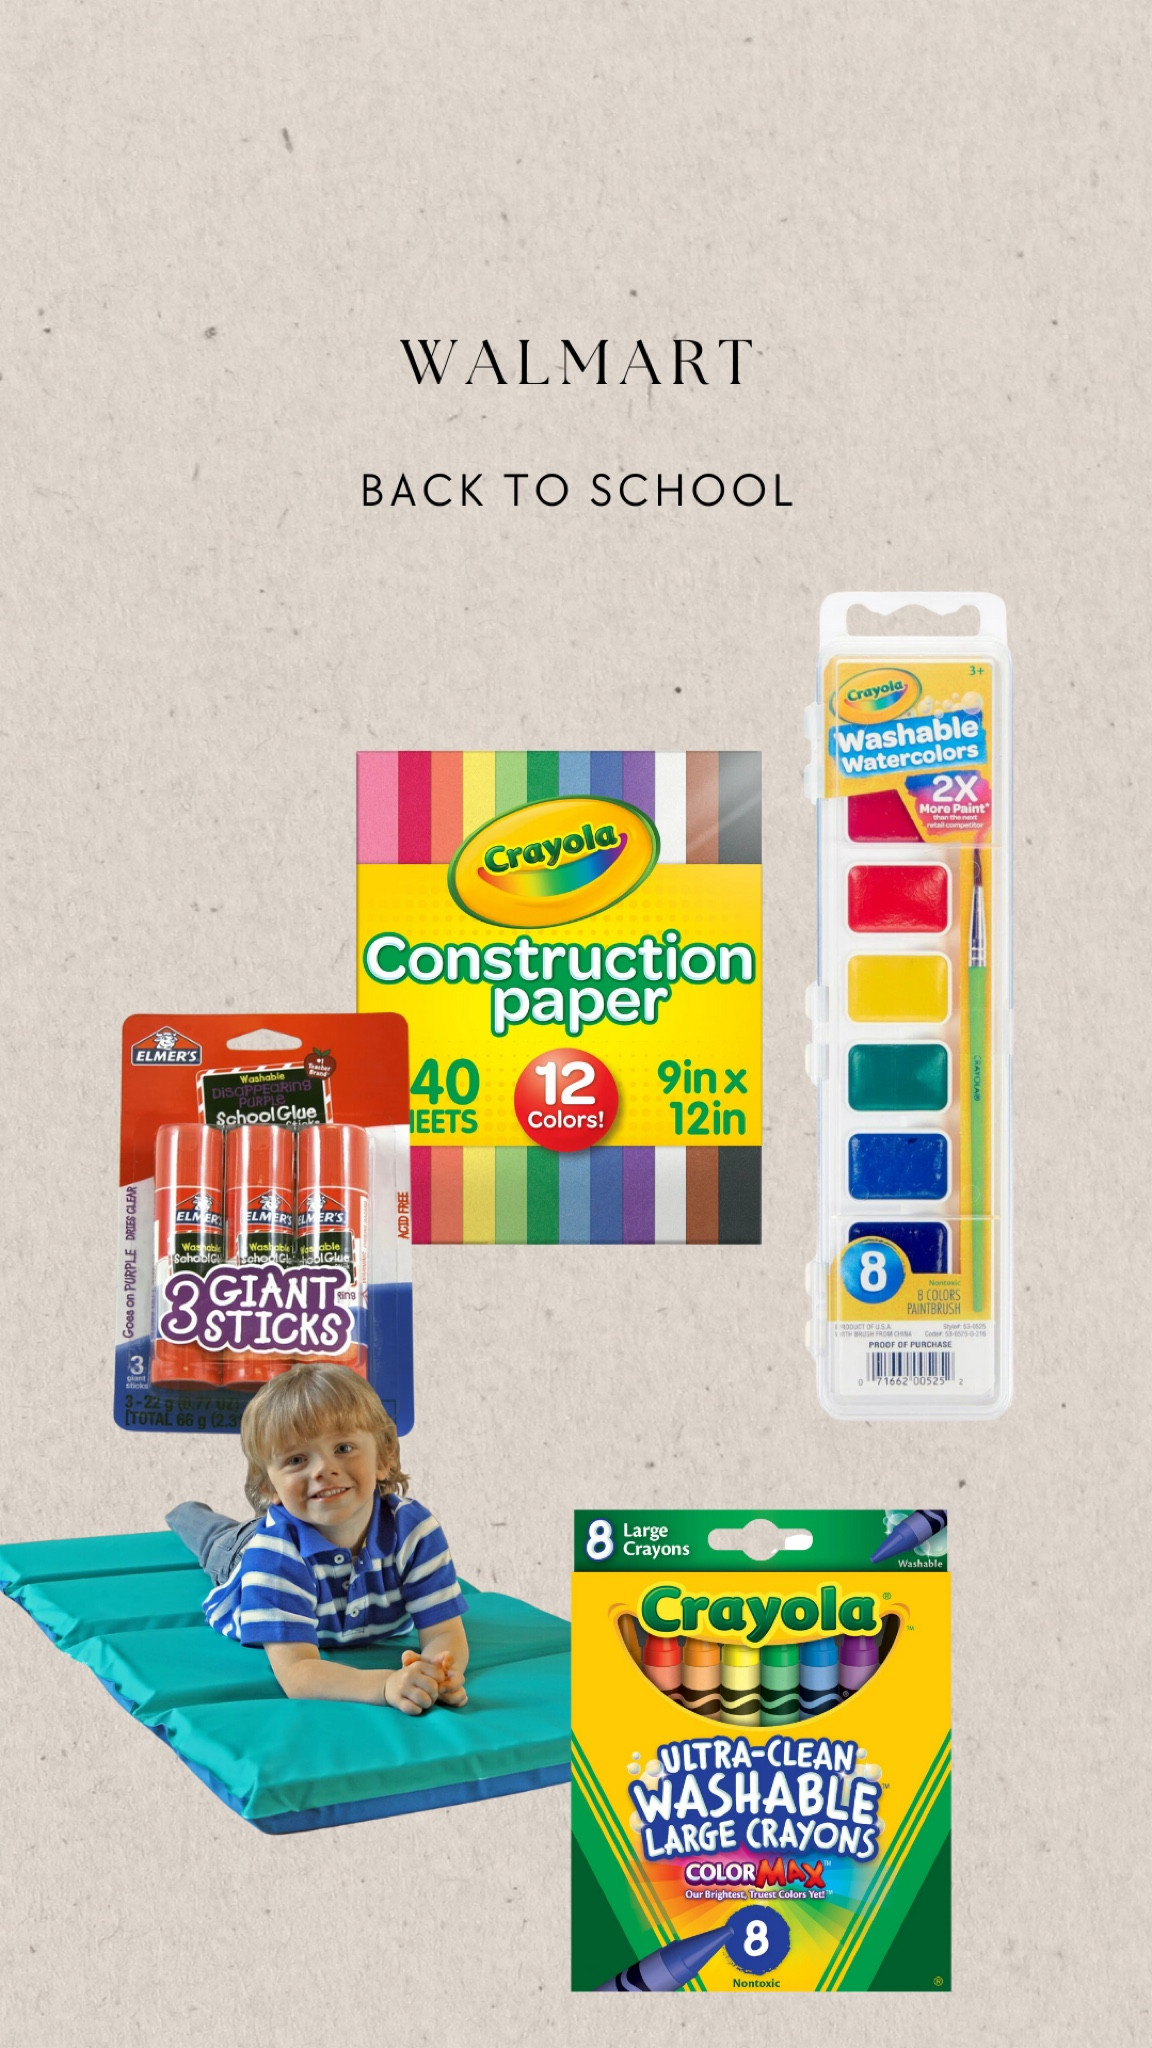 Crayola Construction Paper in 10 Assorted Colors, School Supplies, Beginner  Child, 240 Sheets